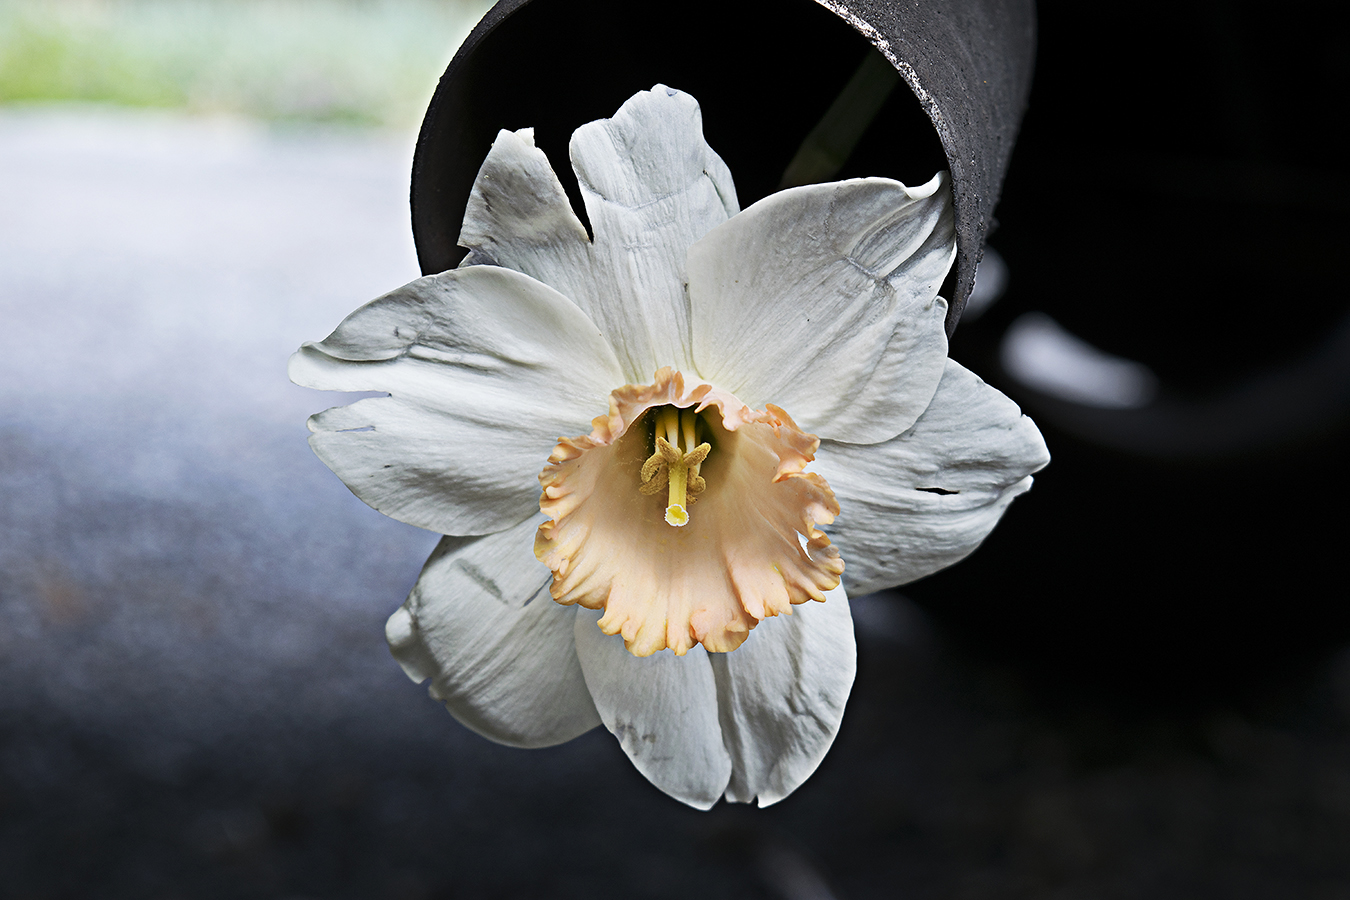 Hassan_Smith_Photography_Journalism_Pollution_White_Daffodil_Exhaust_Pipe_Smog_Killing_The_Enviornment_pollution_flowers_car_exhaust